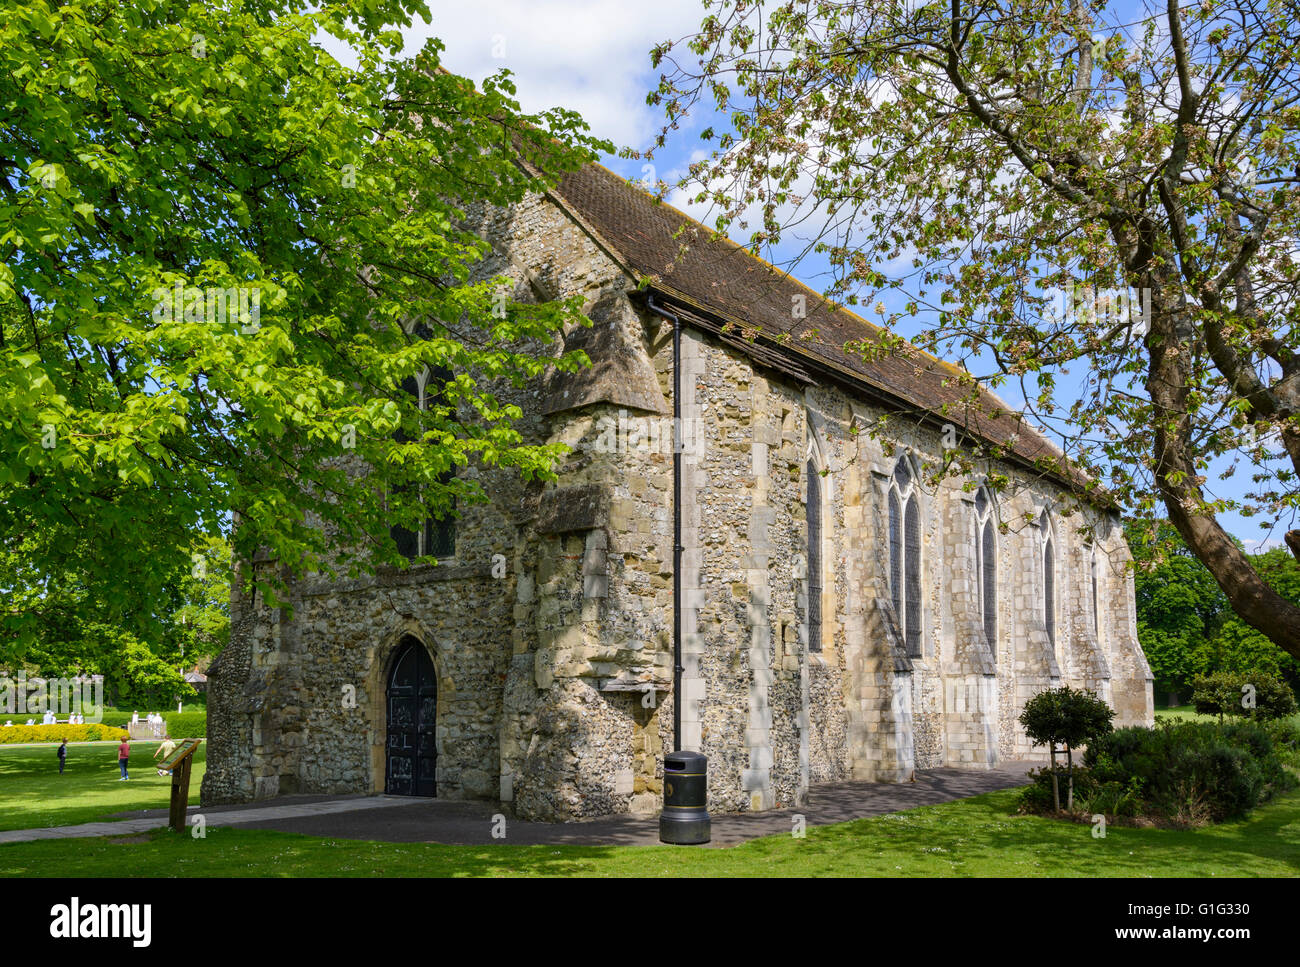 The Guildhall medieval ecclesiastical building (Greyfriars Church or Chapel) in Priory Park, Chichester, West Sussex, England, UK. Stock Photo